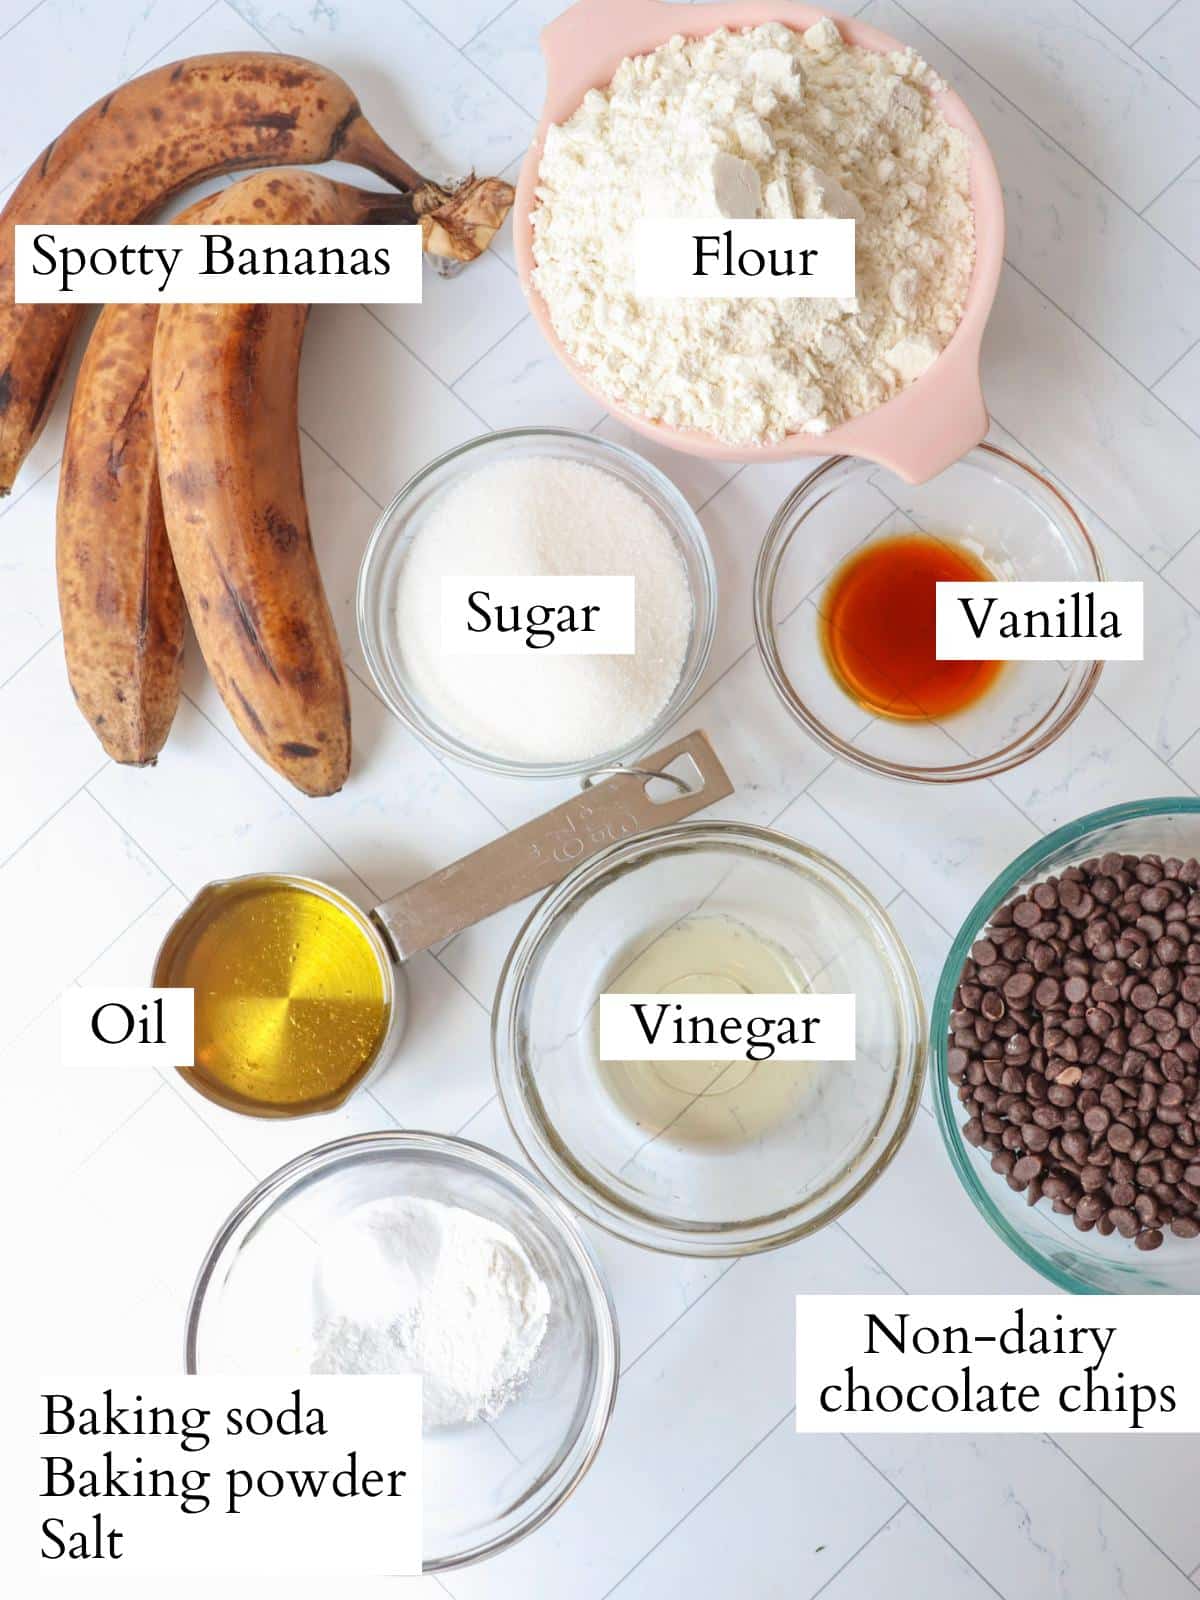 Ingredients for vegan banana bread laid out in small glass bowls on a counter.